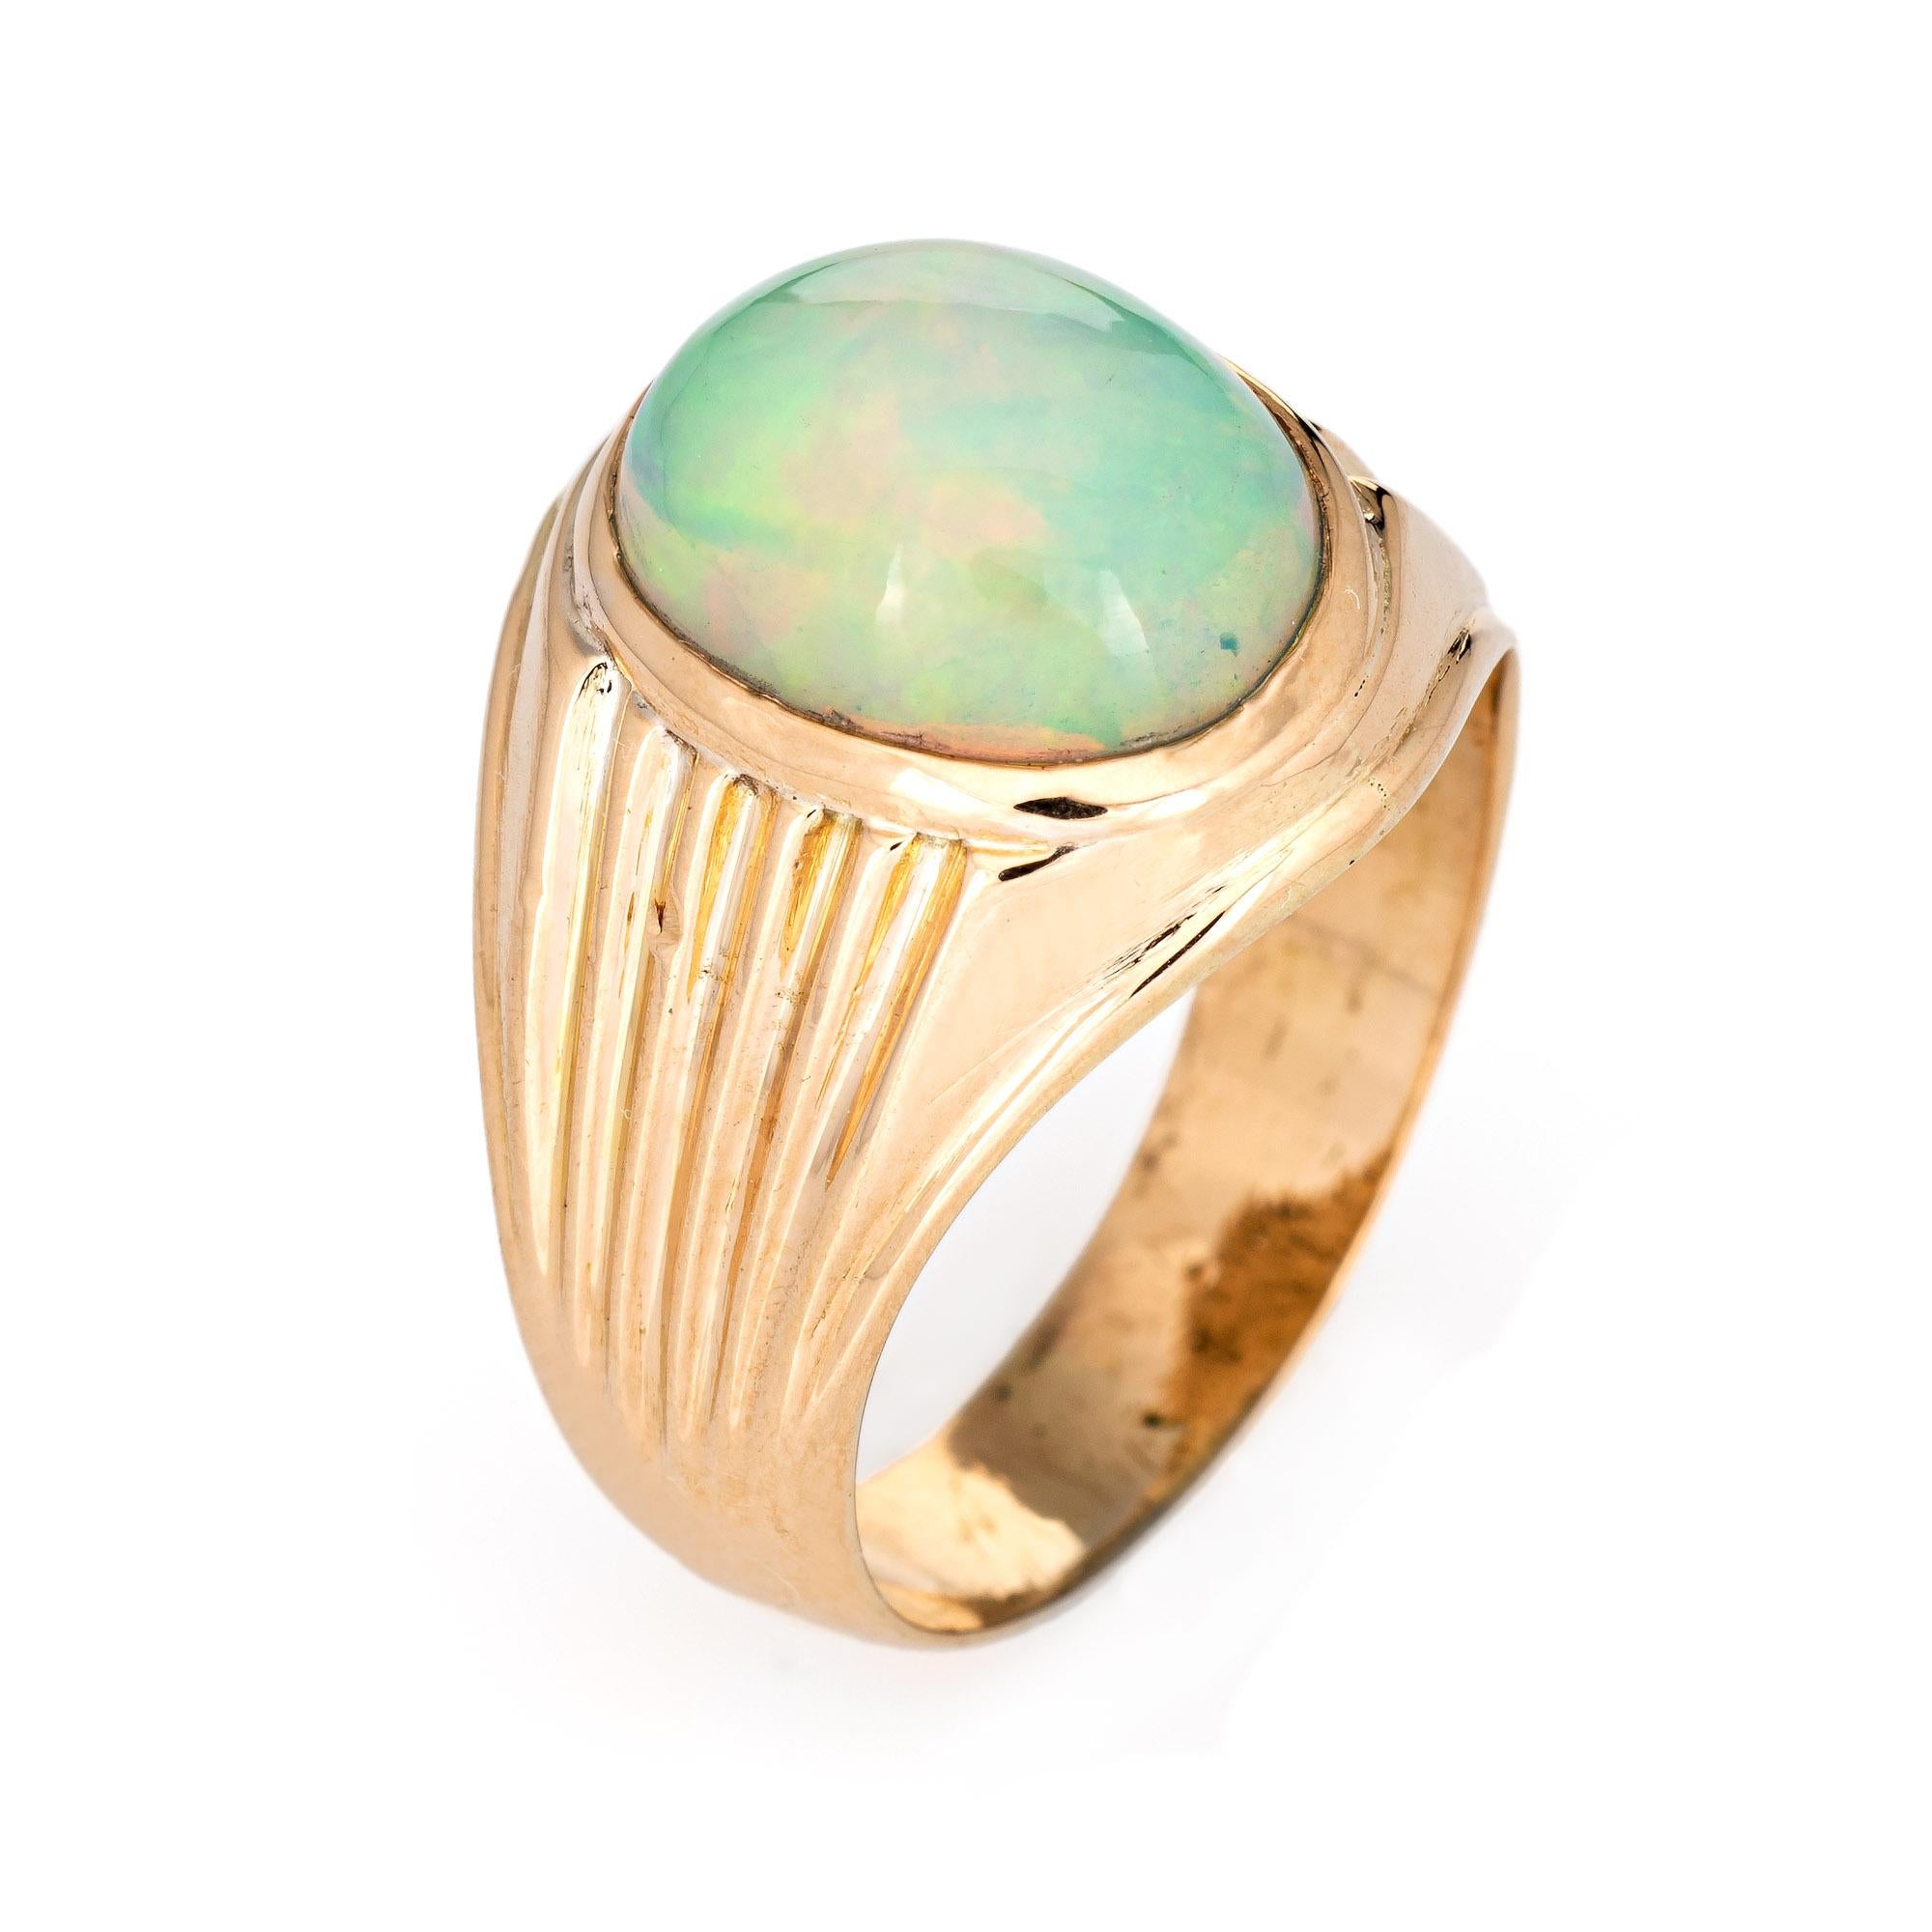 Stylish vintage 5.50ct opal ring crafted in 18 karat yellow gold (circa 1960s to 1970s).

The cabochon cut opal measures 12.5mm x 10mm (estimated at 5.50 carats). The opal is in excellent condition and free of cracks or chips. 

The natural opal